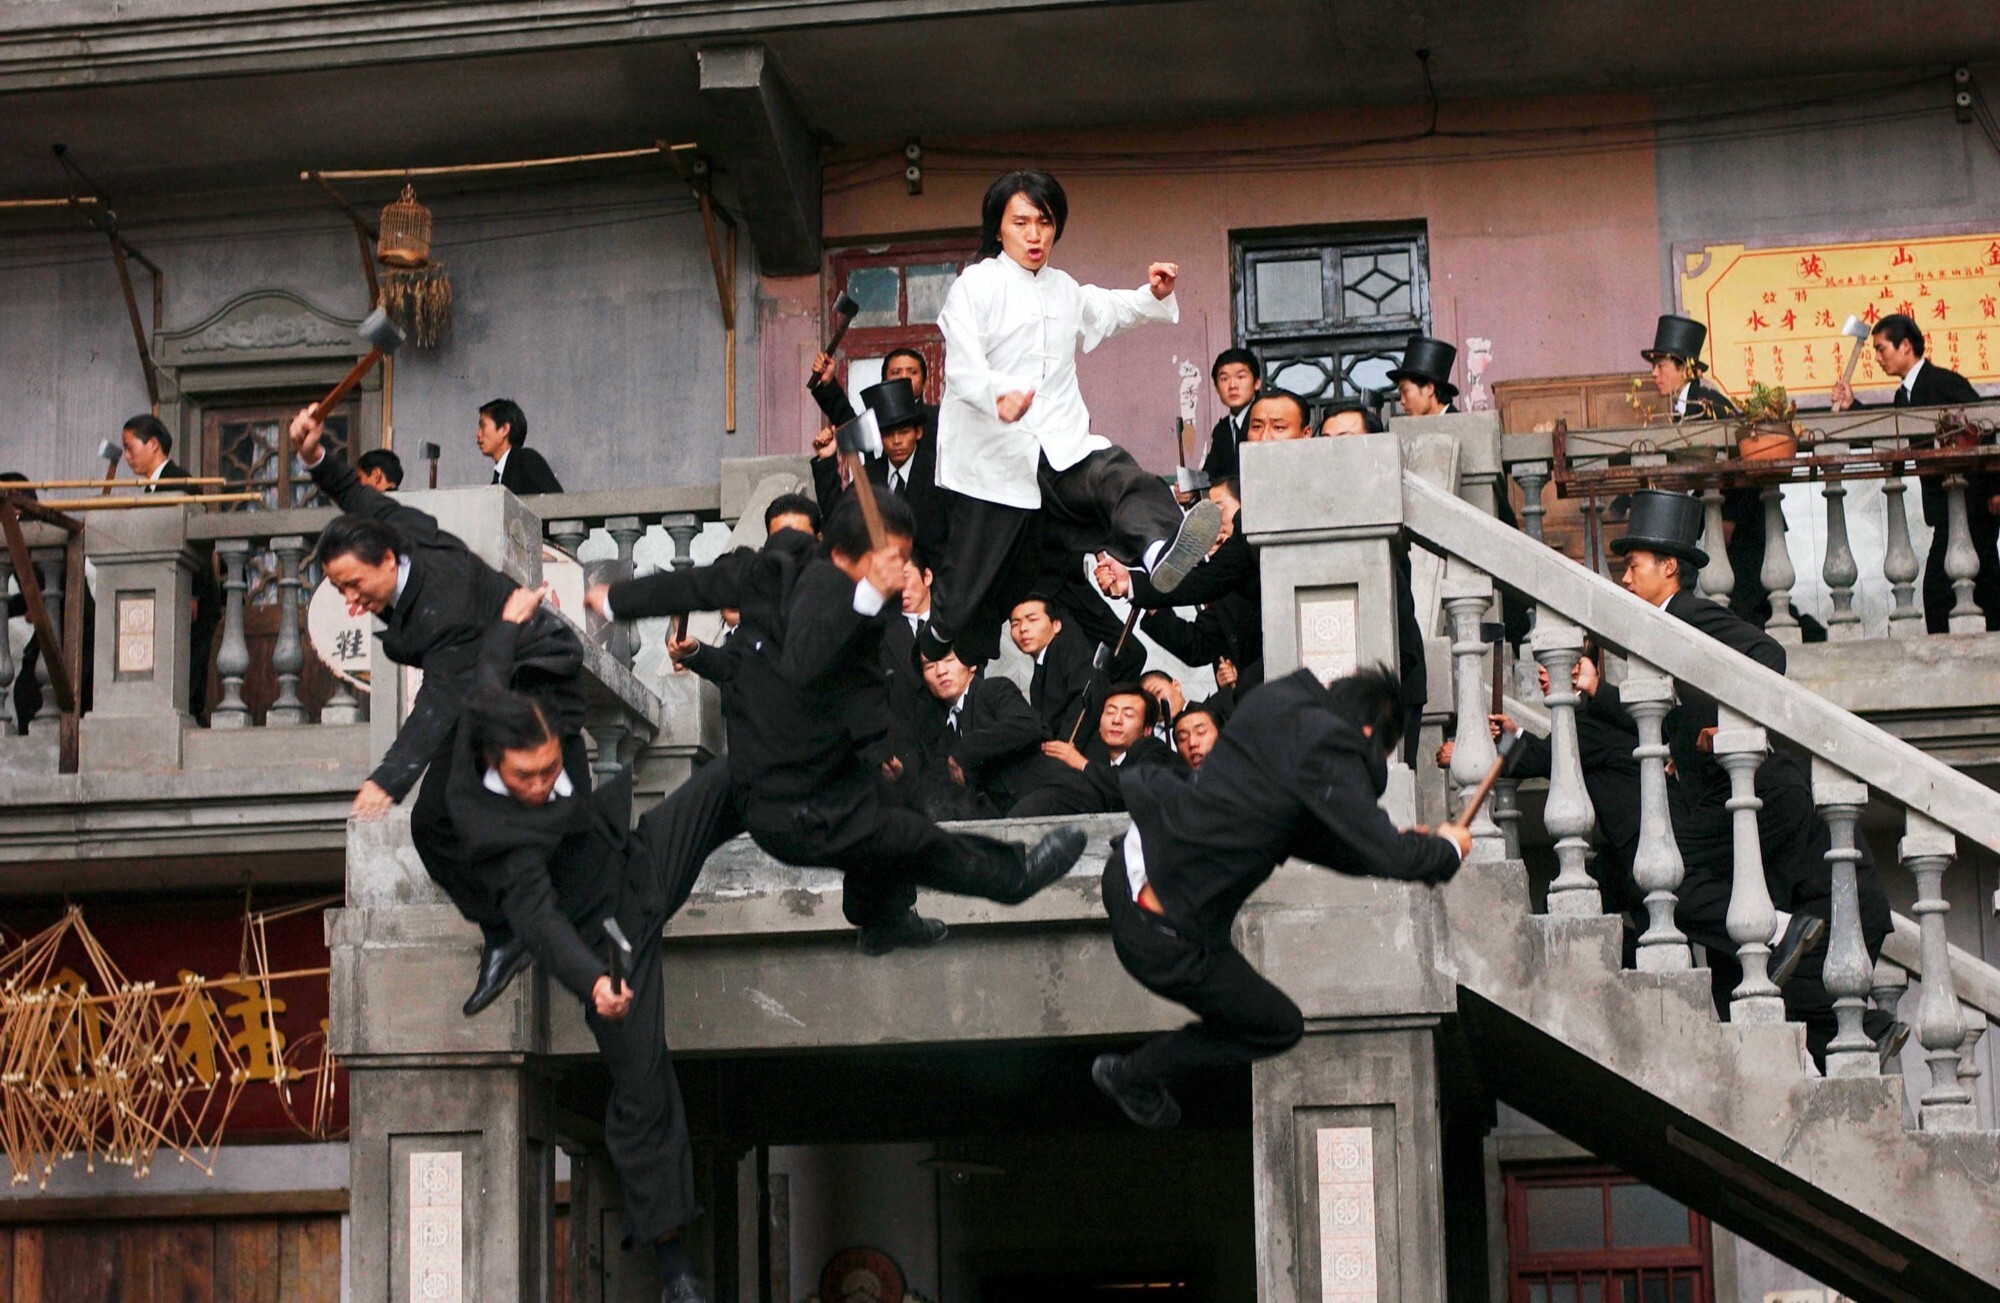 Stephen Chow (in white shirt) in a still from Kung Fu Hustle, the 2004 film that made him an international star. He also wrote and directed the film, a blend of cartoons, wuxia, CGI, and action.